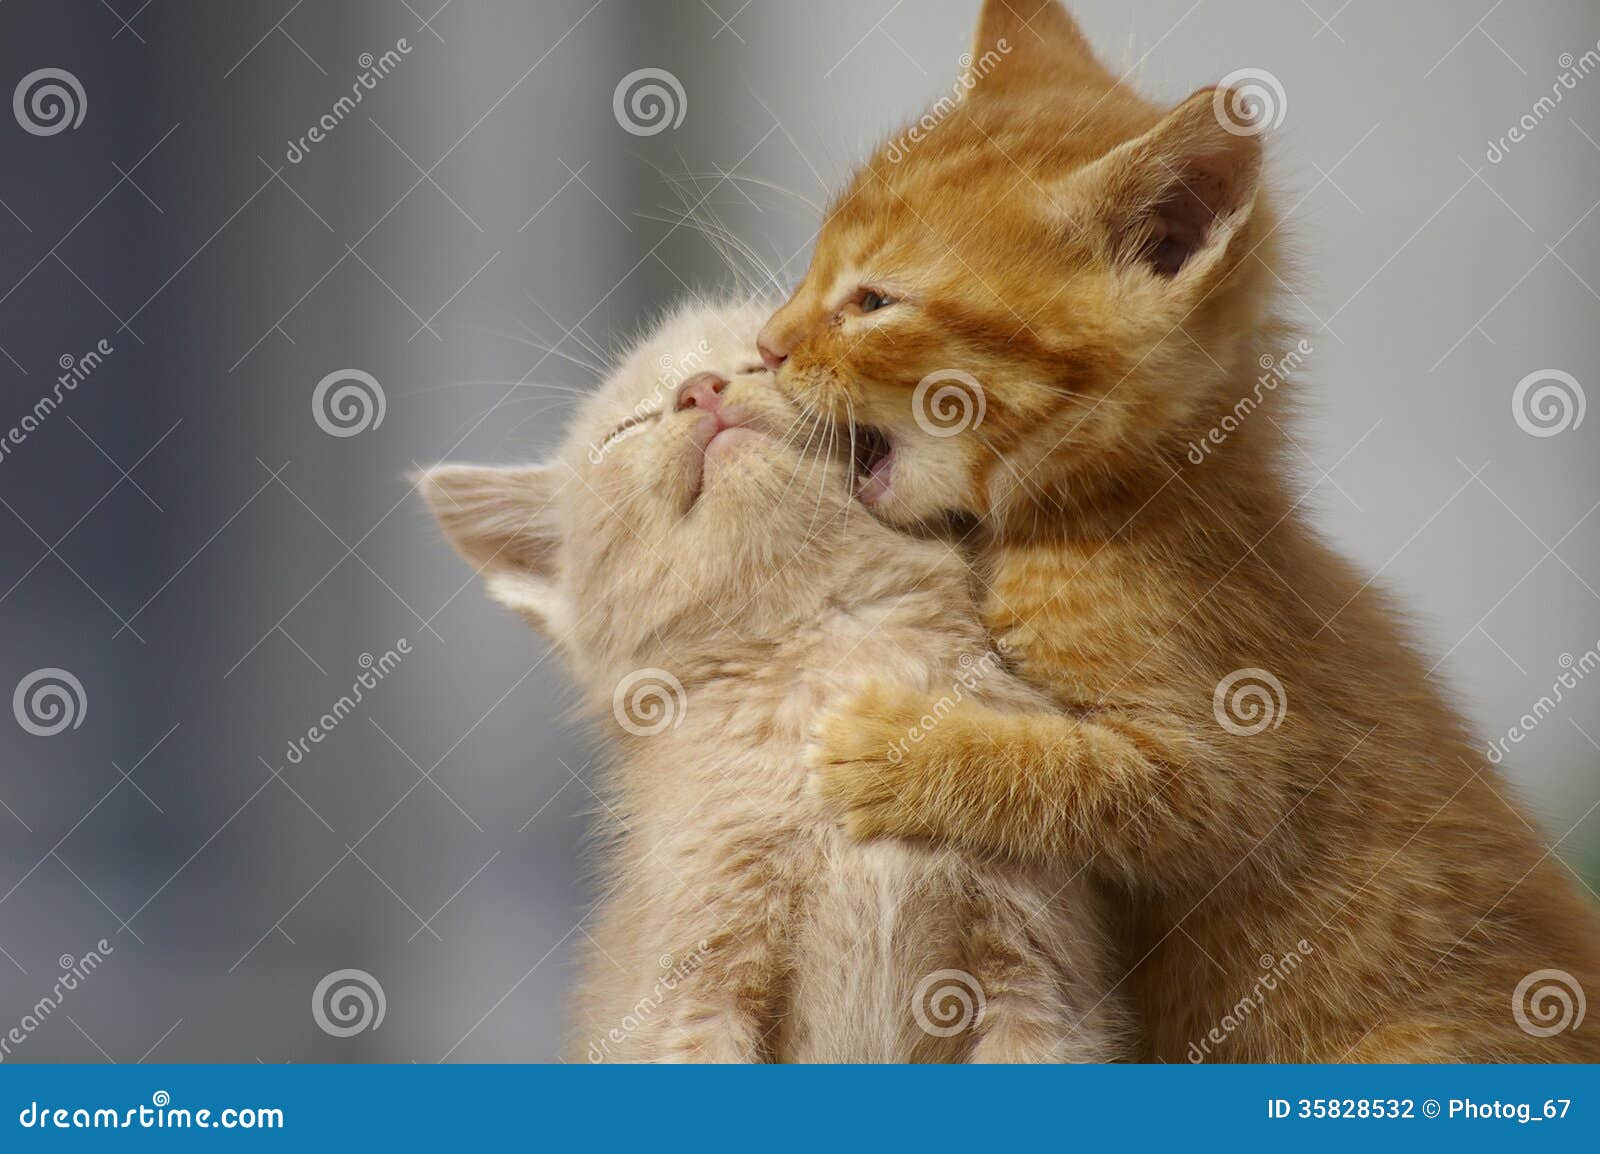 kittens playing . two young cats playfighting outdoors.